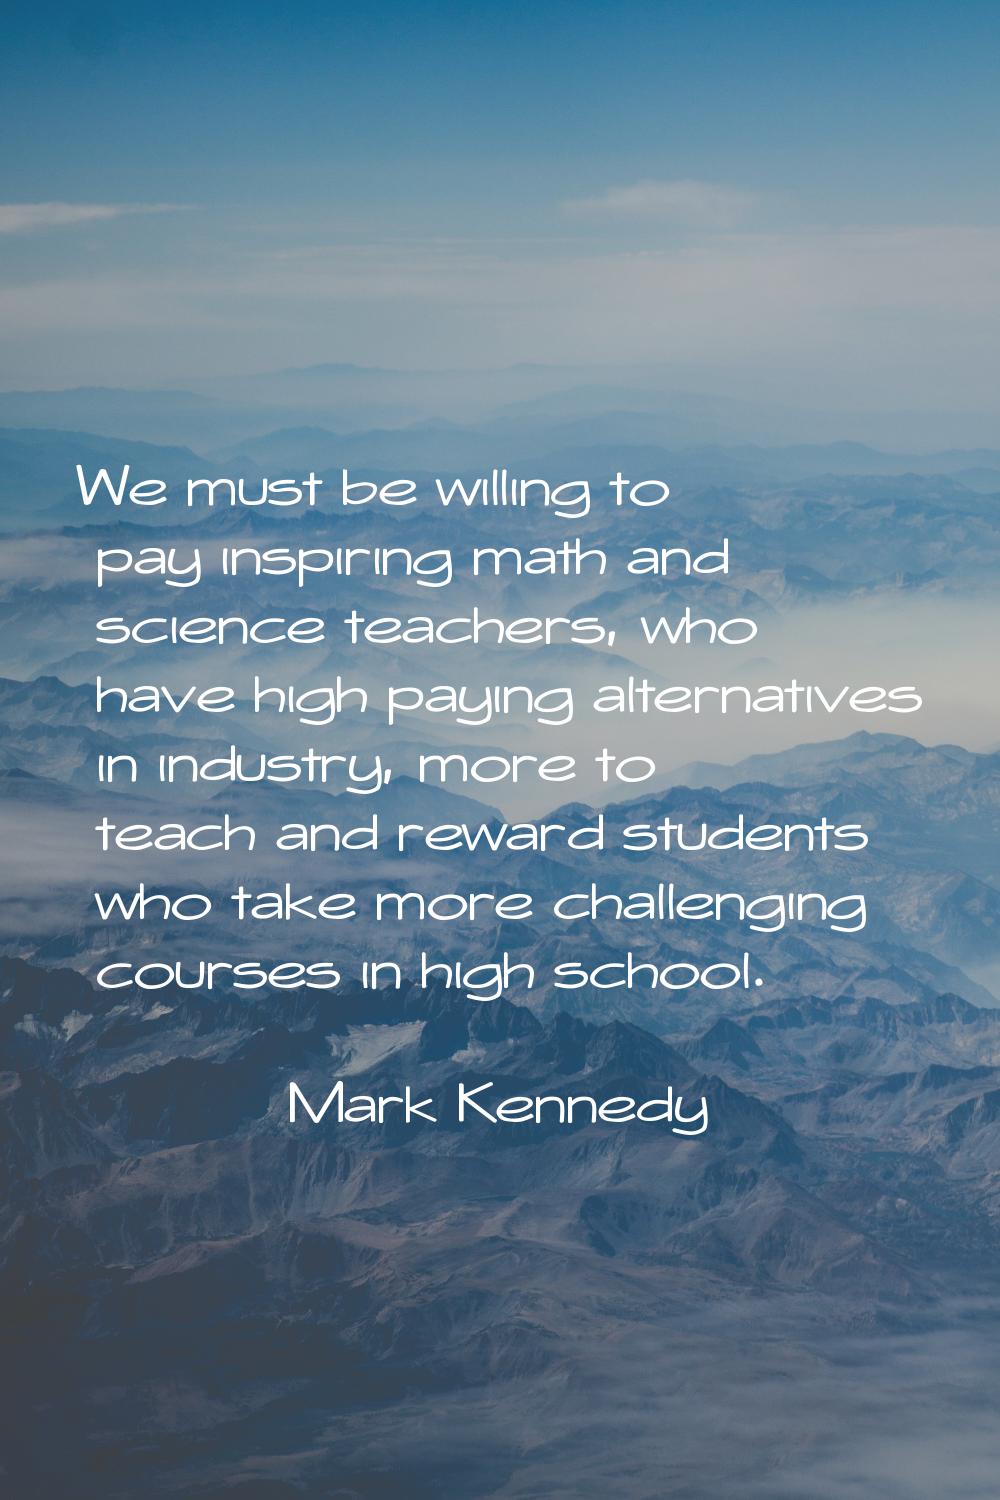 We must be willing to pay inspiring math and science teachers, who have high paying alternatives in